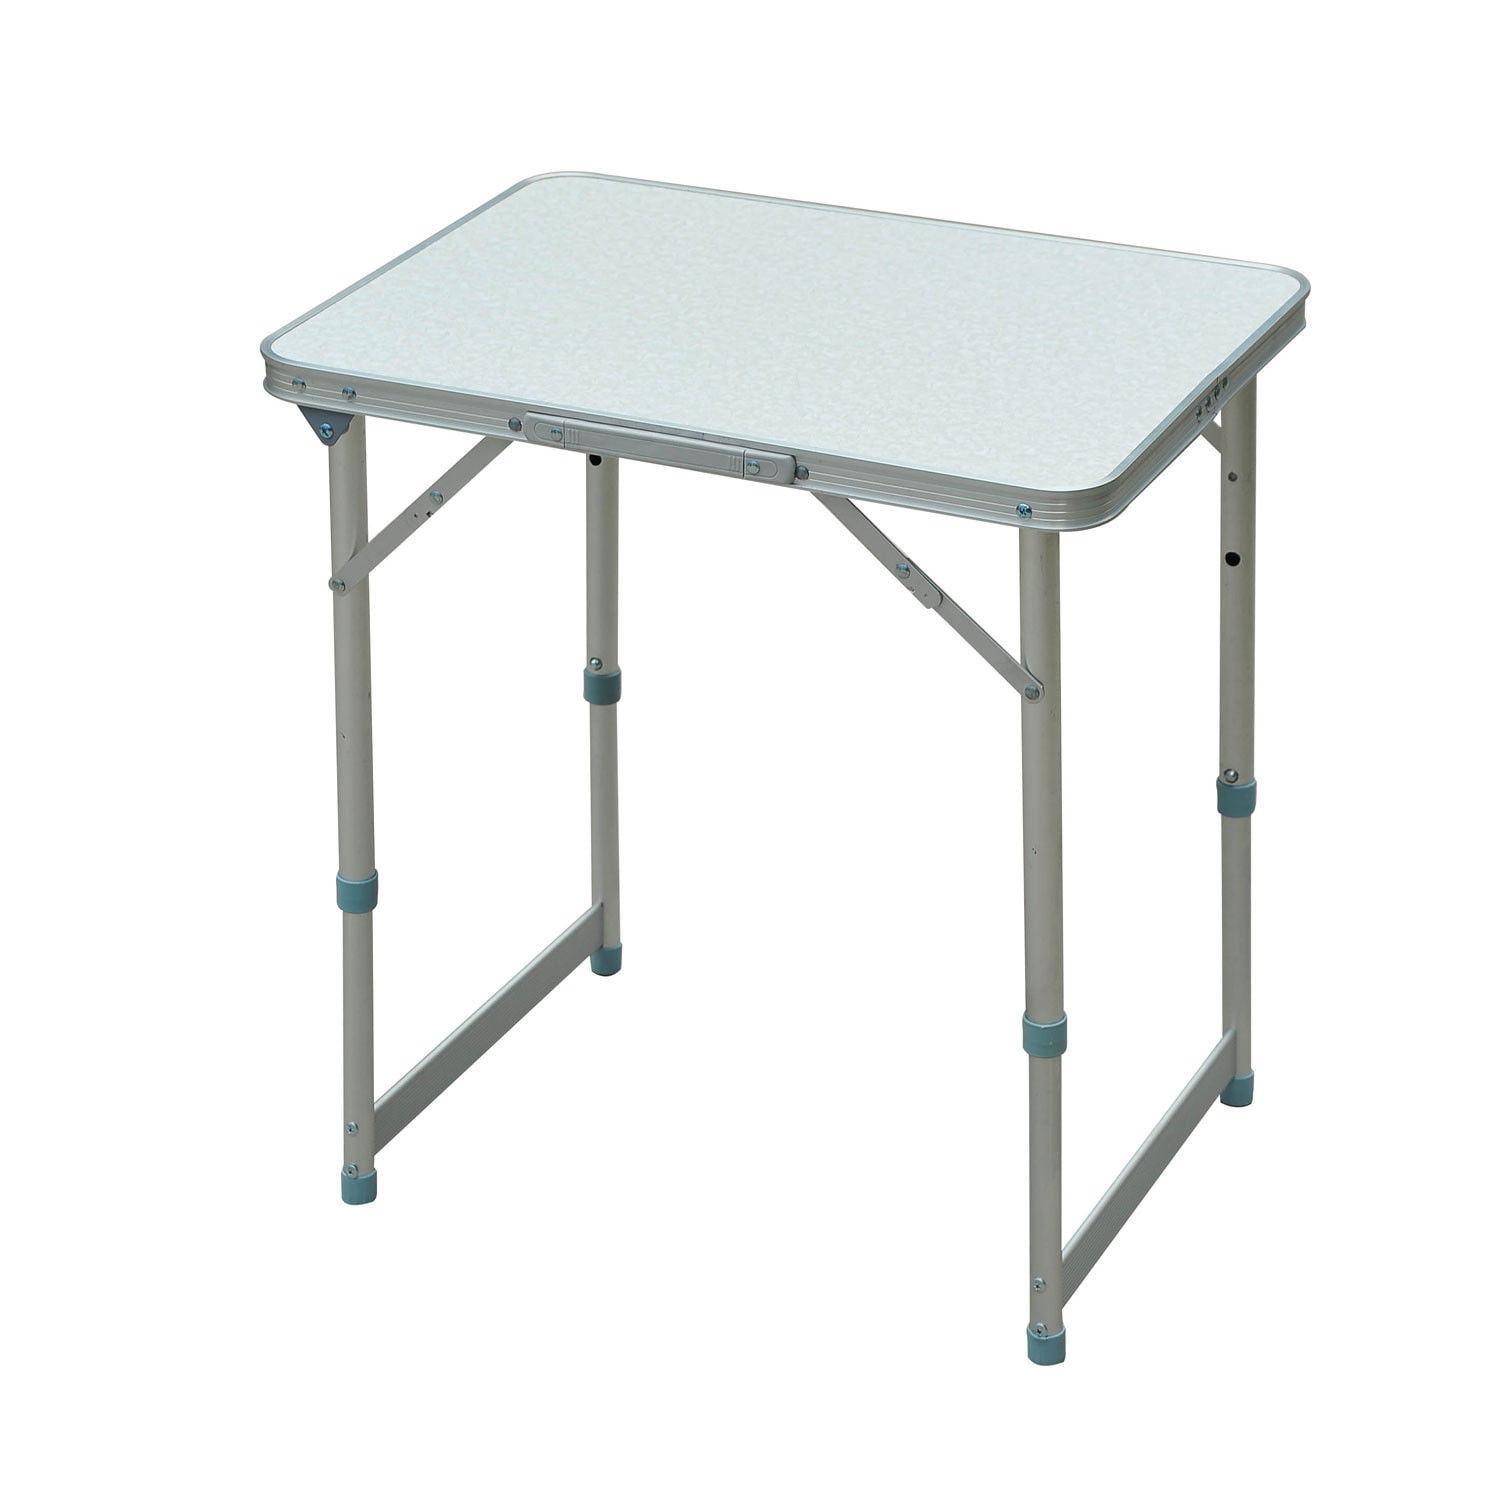 Compact Folding Tables For Versatile Use